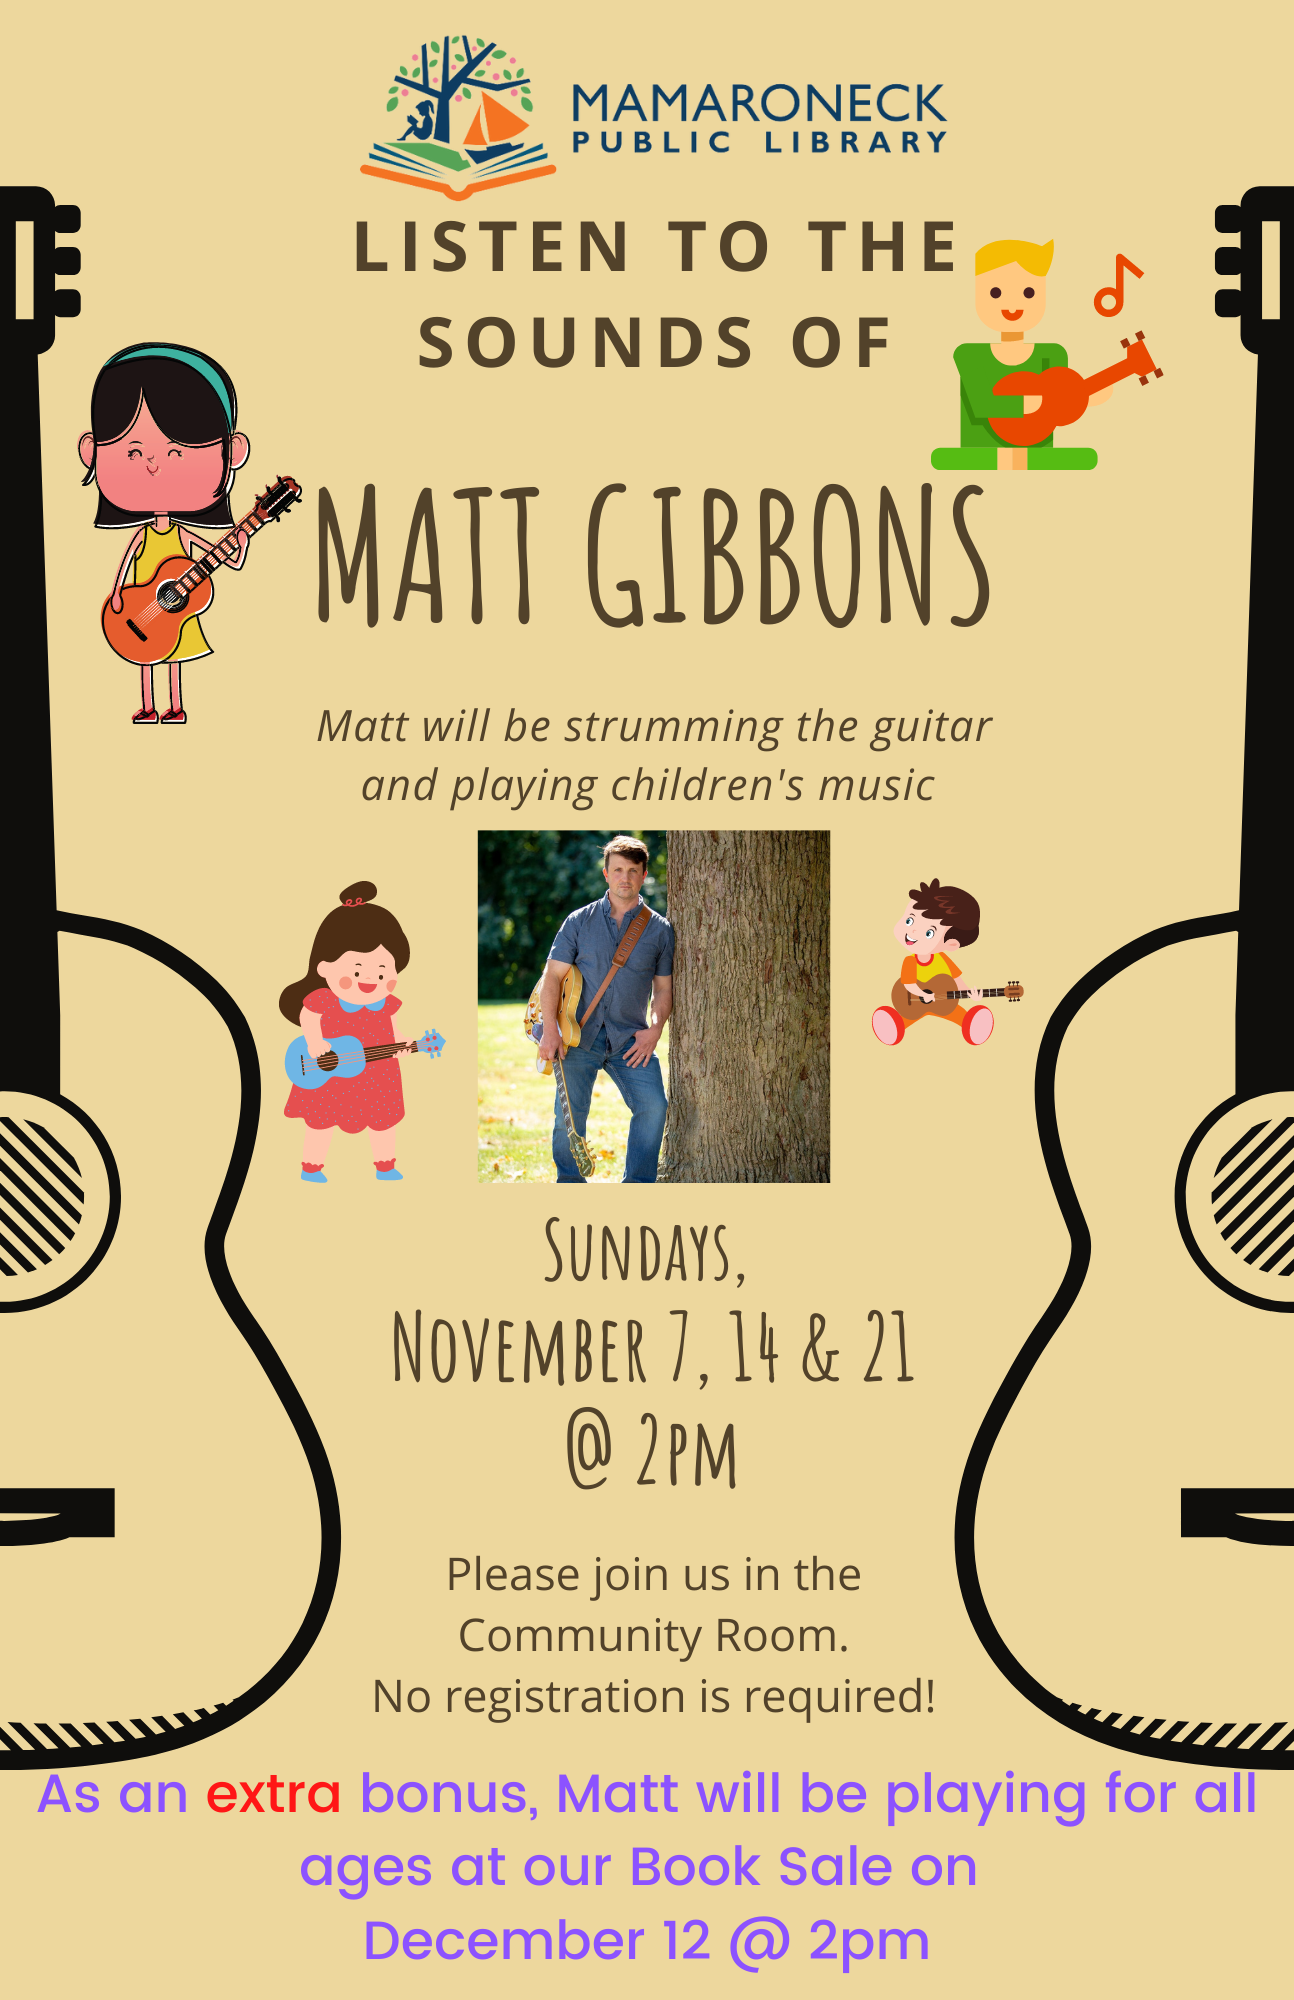 Matt Gibbons, guitarist, appearing in early November, 3 Sundays, at Library